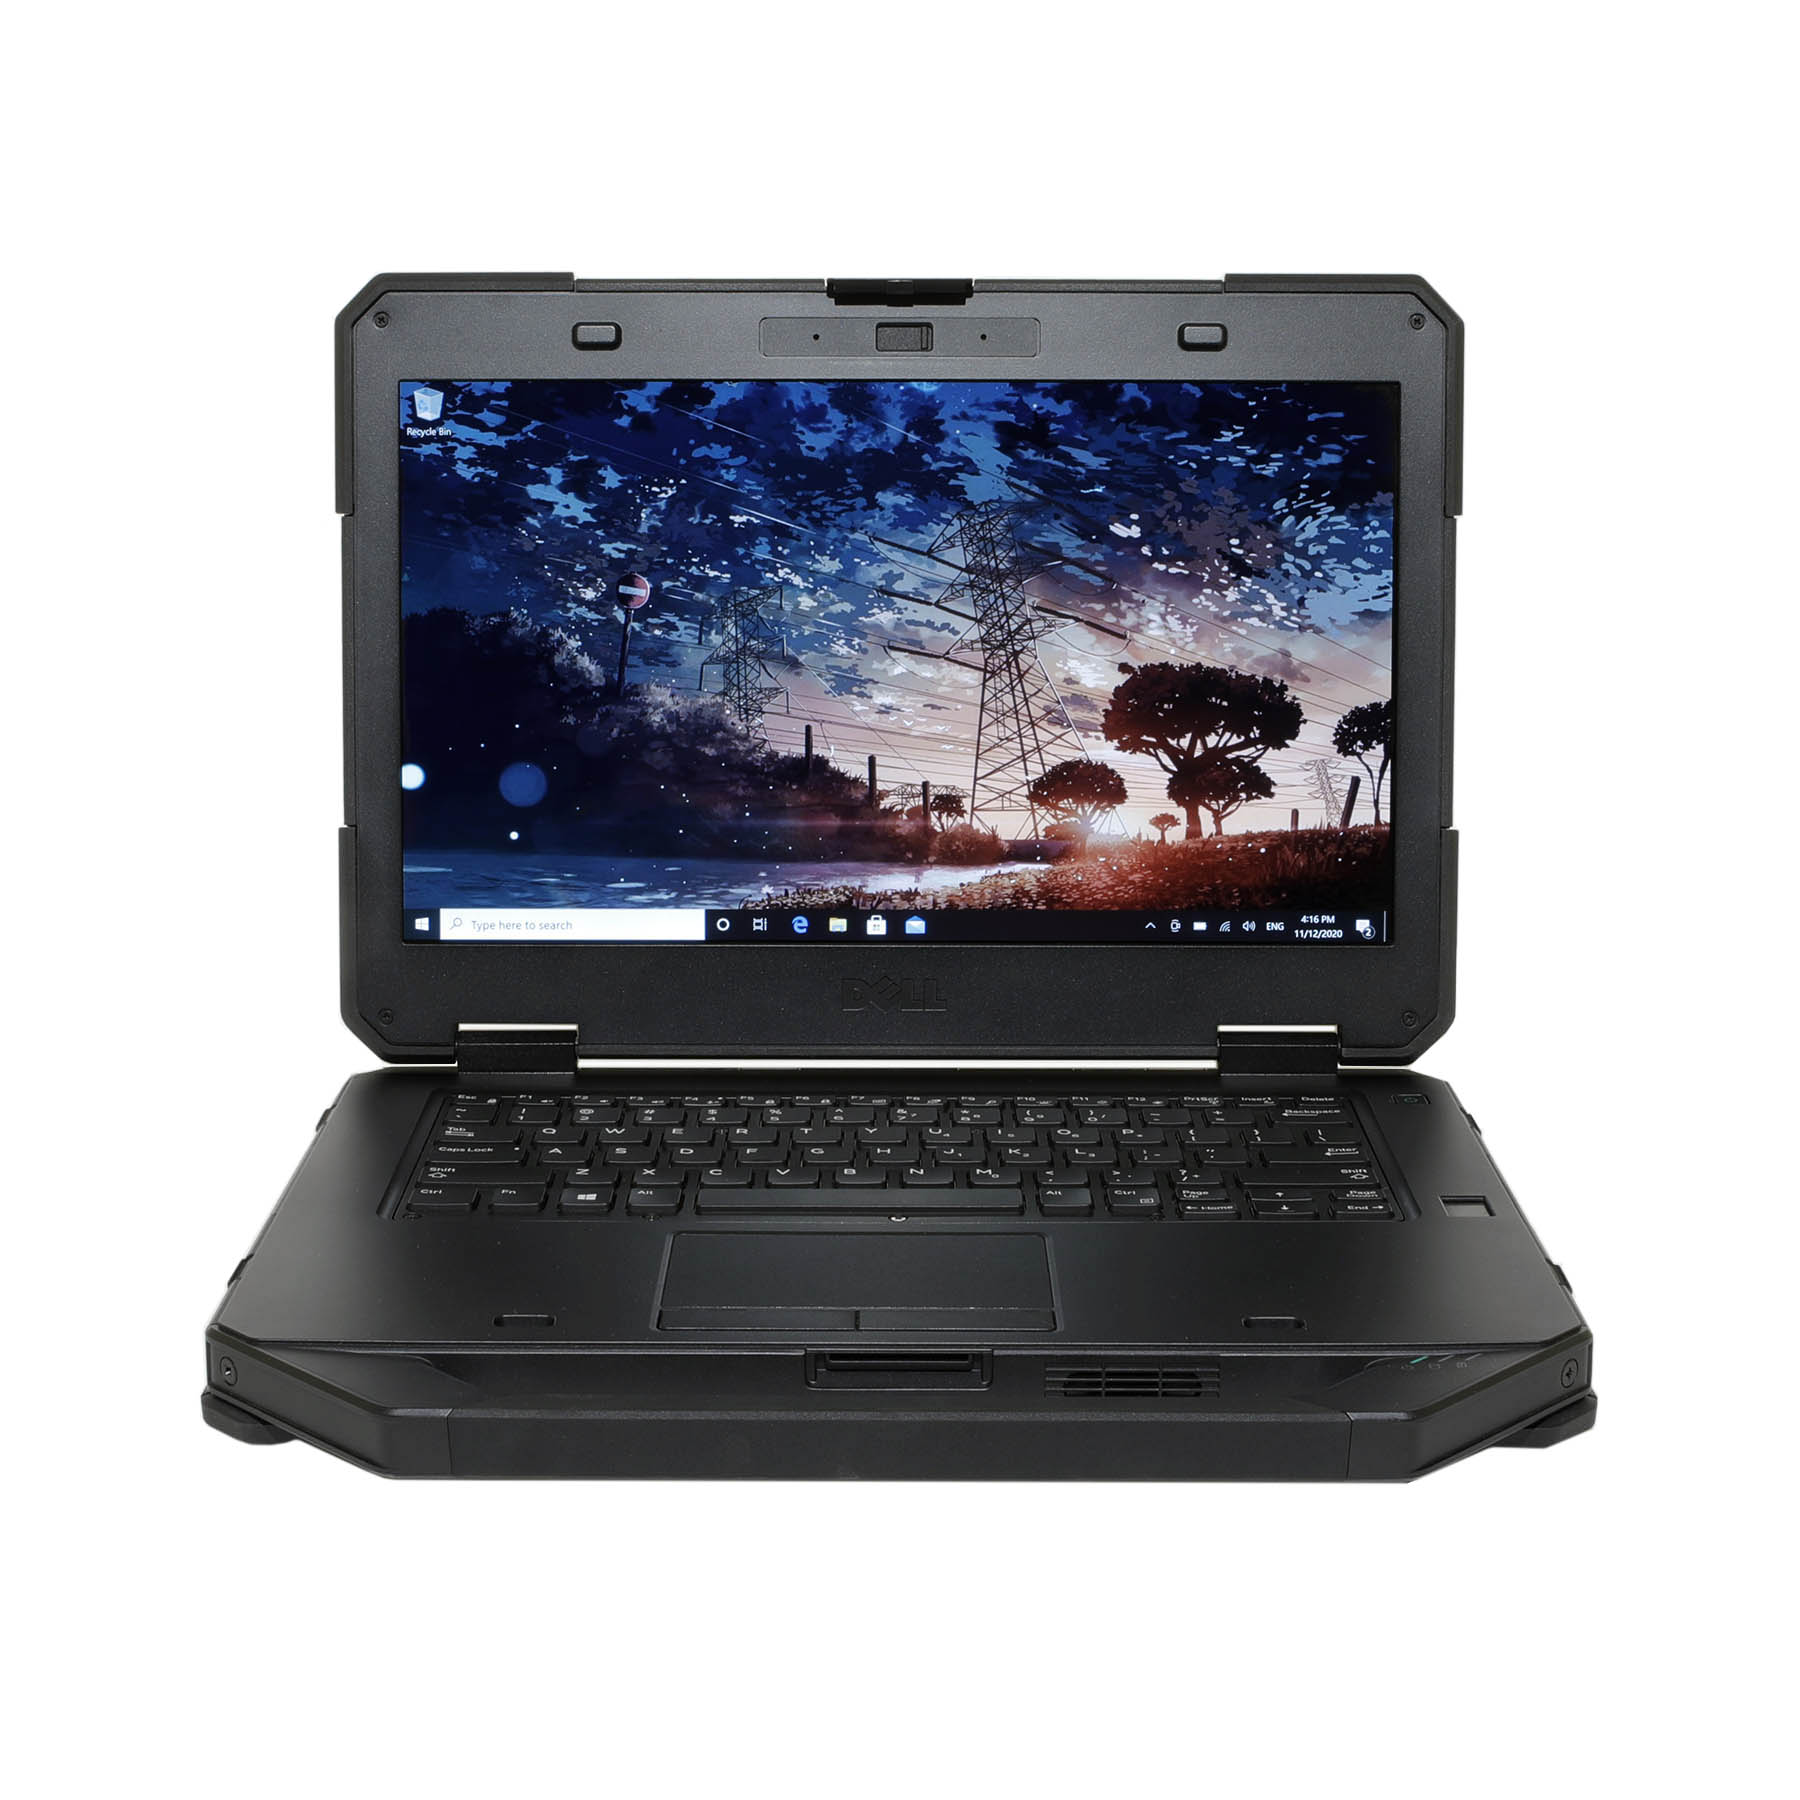 Dell Latitude 14 Rugged (5414) - Portable & Industrial Service Laptop